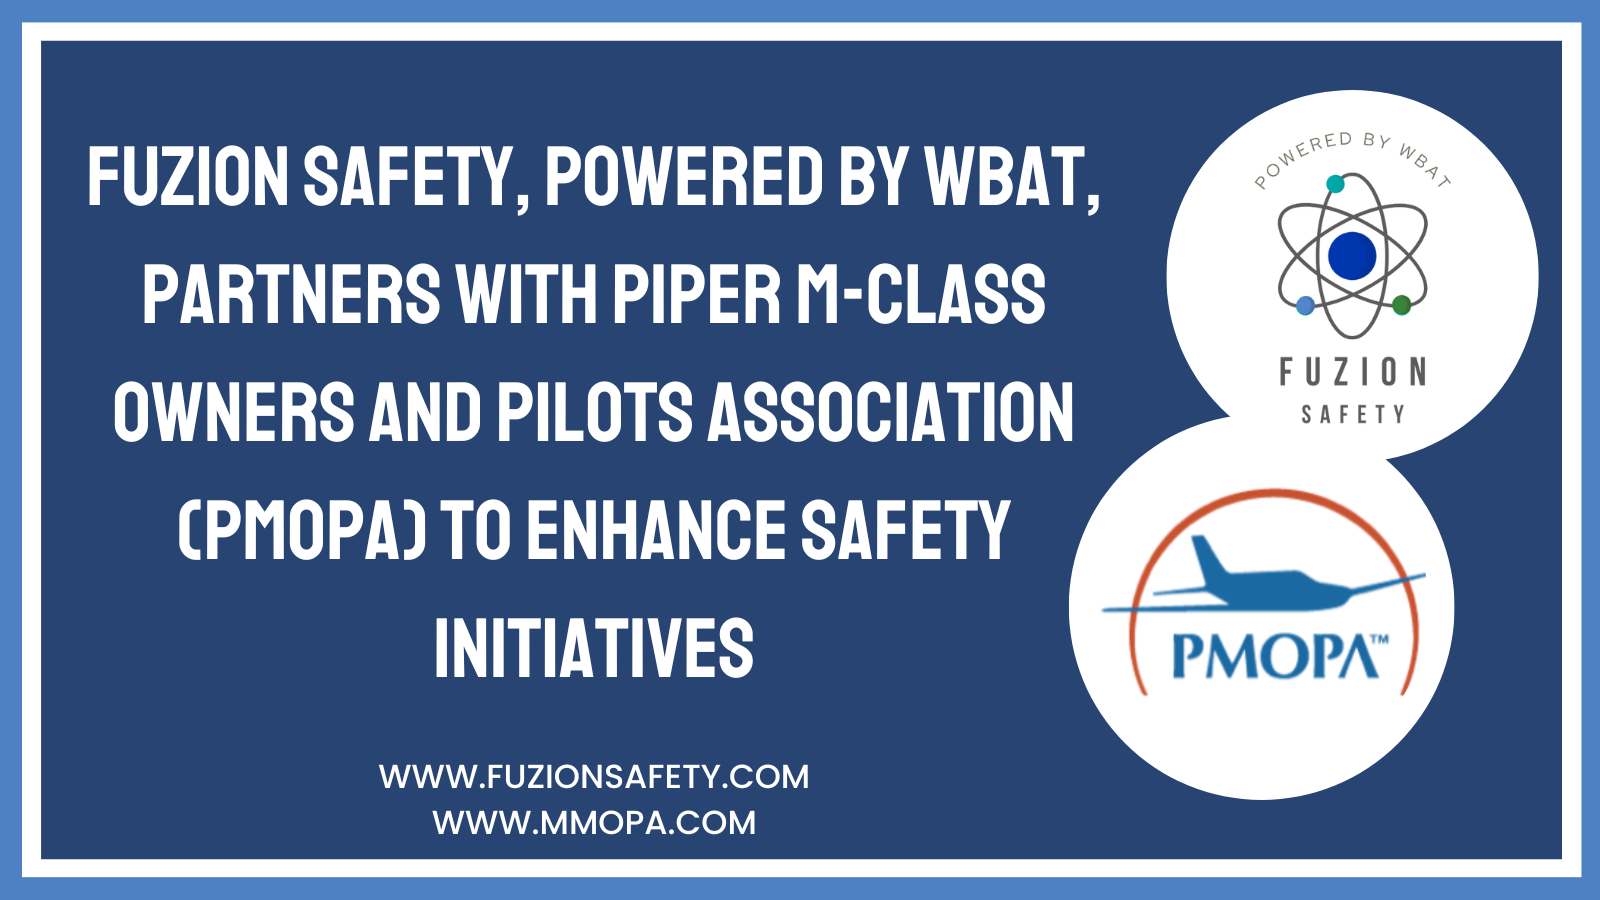 Fuzion Safety, Powered by WBAT, Partners with PMOPA to Enhance Safety Initiatives